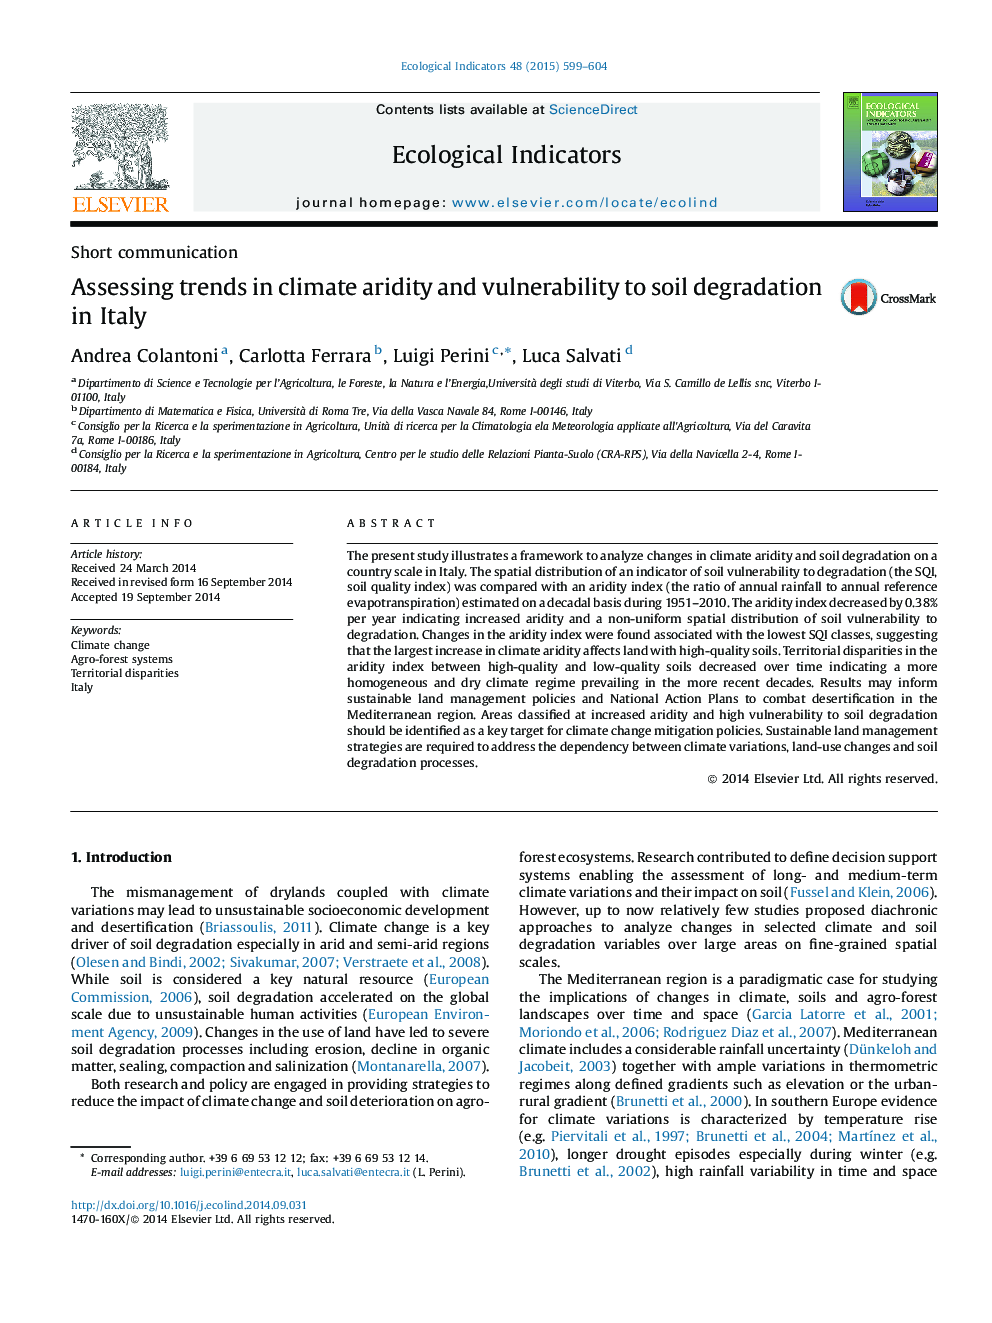 Assessing trends in climate aridity and vulnerability to soil degradation in Italy